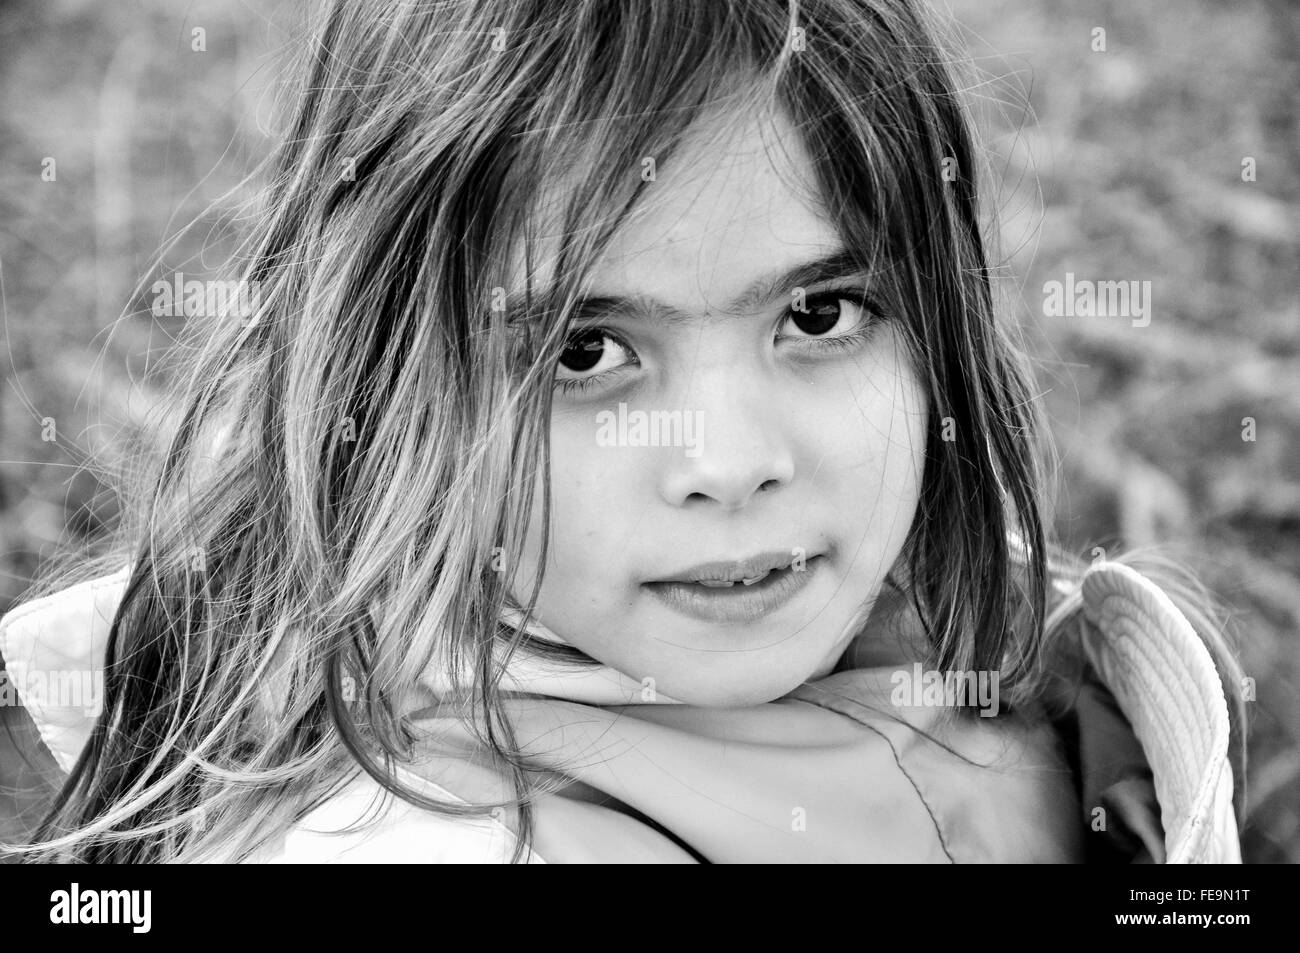 Young blonde girl is posing outdoor looking at the camera. Argentina, near Buenos Aires. Stock Photo